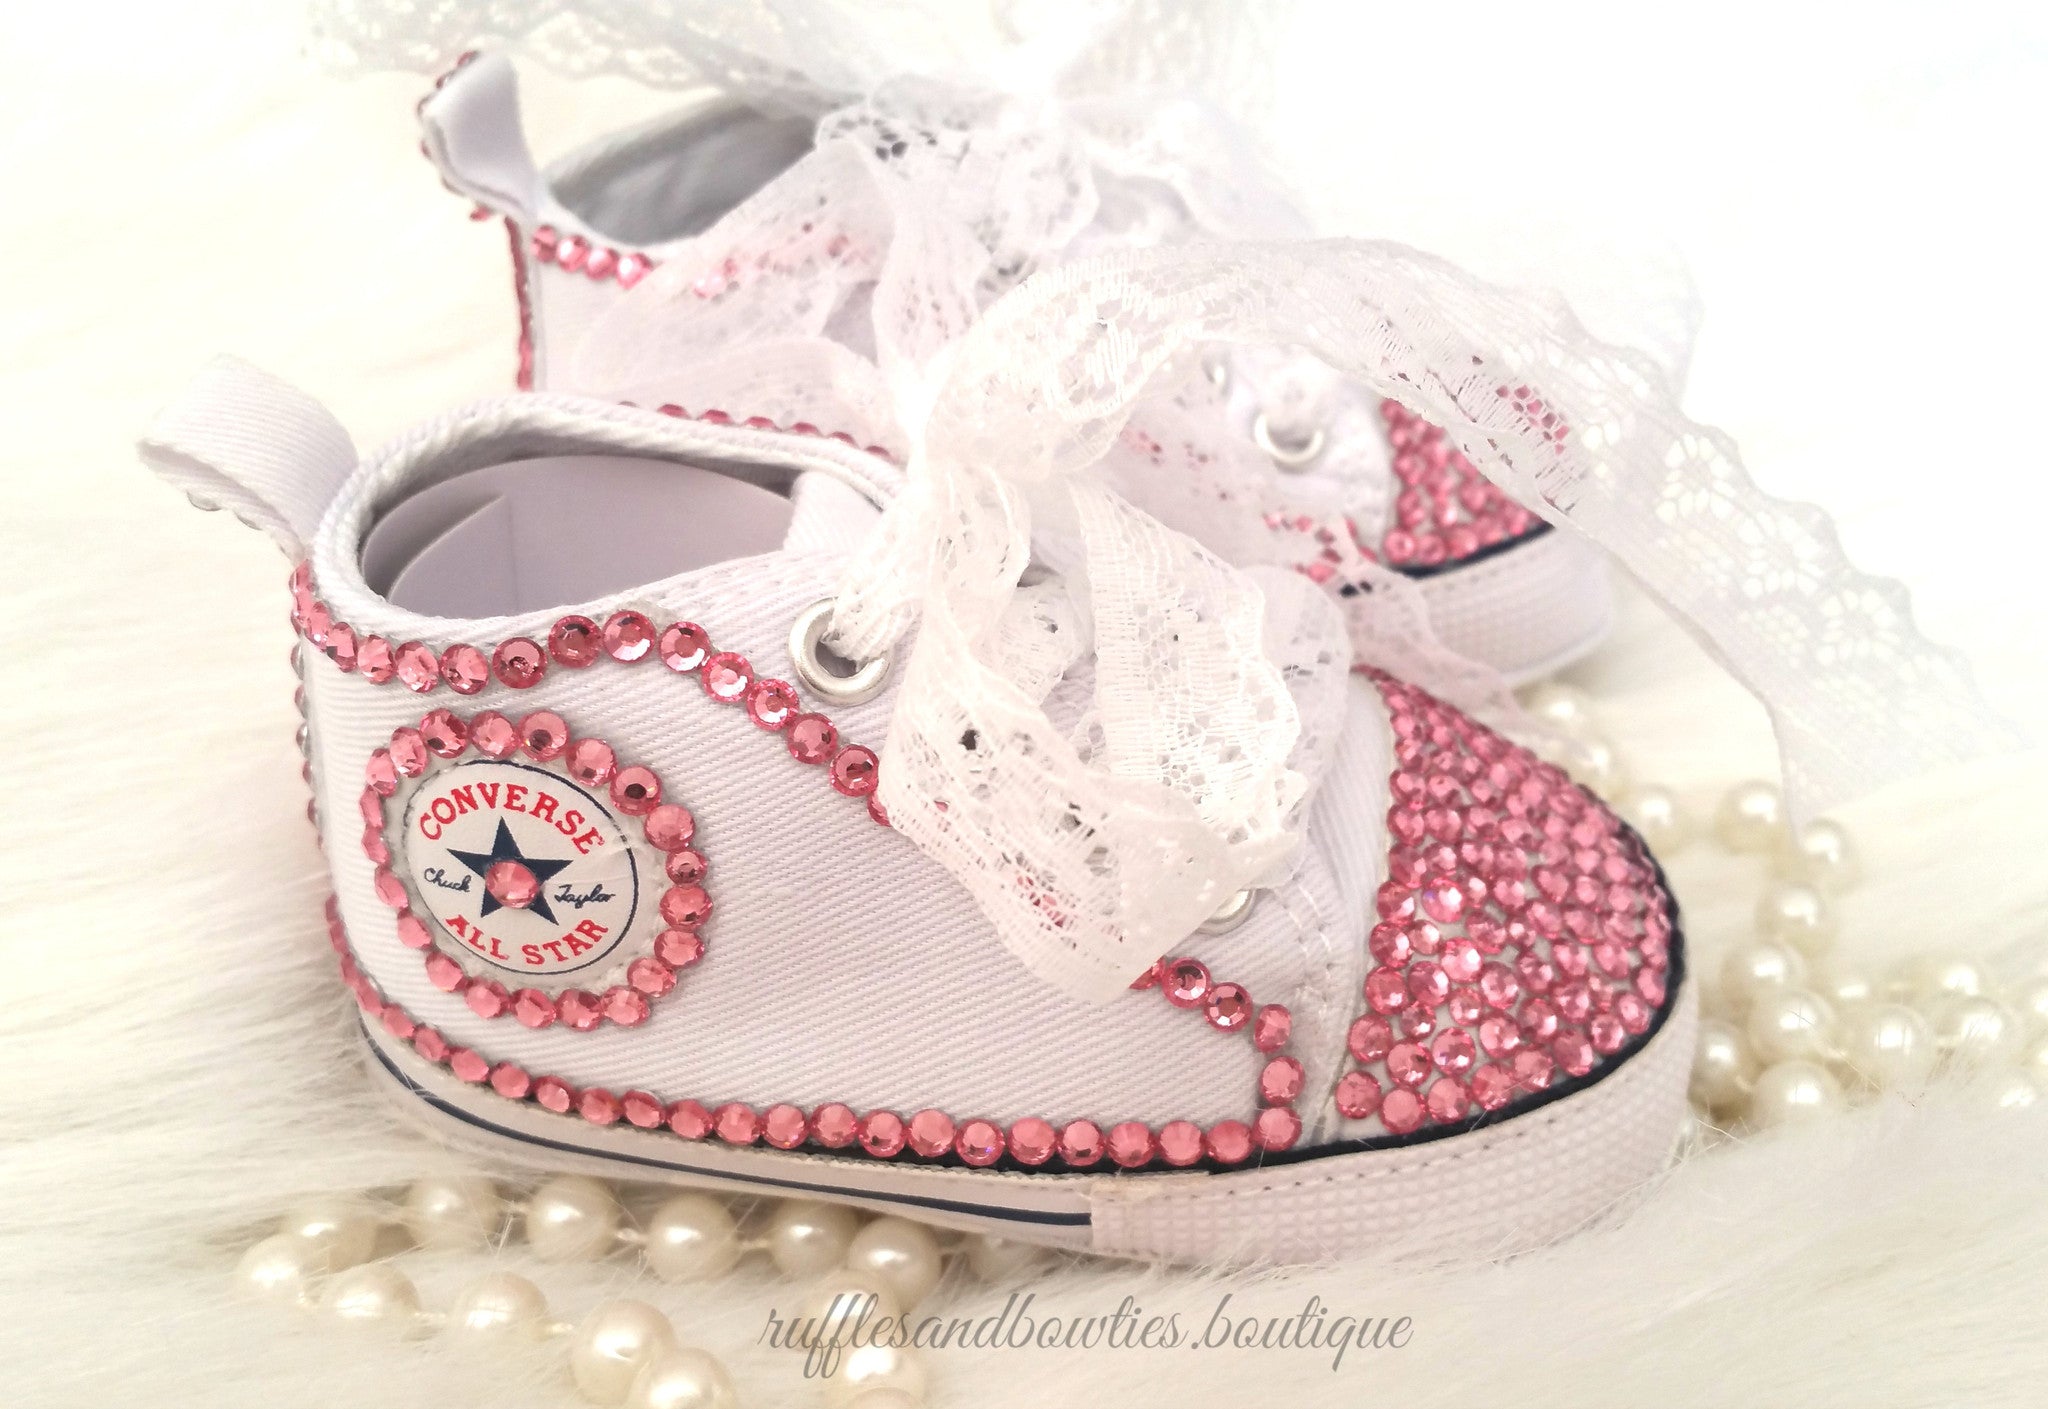 Baby Girl Crystal Shoes - White & Pink Crystal Baby Converse High Tops